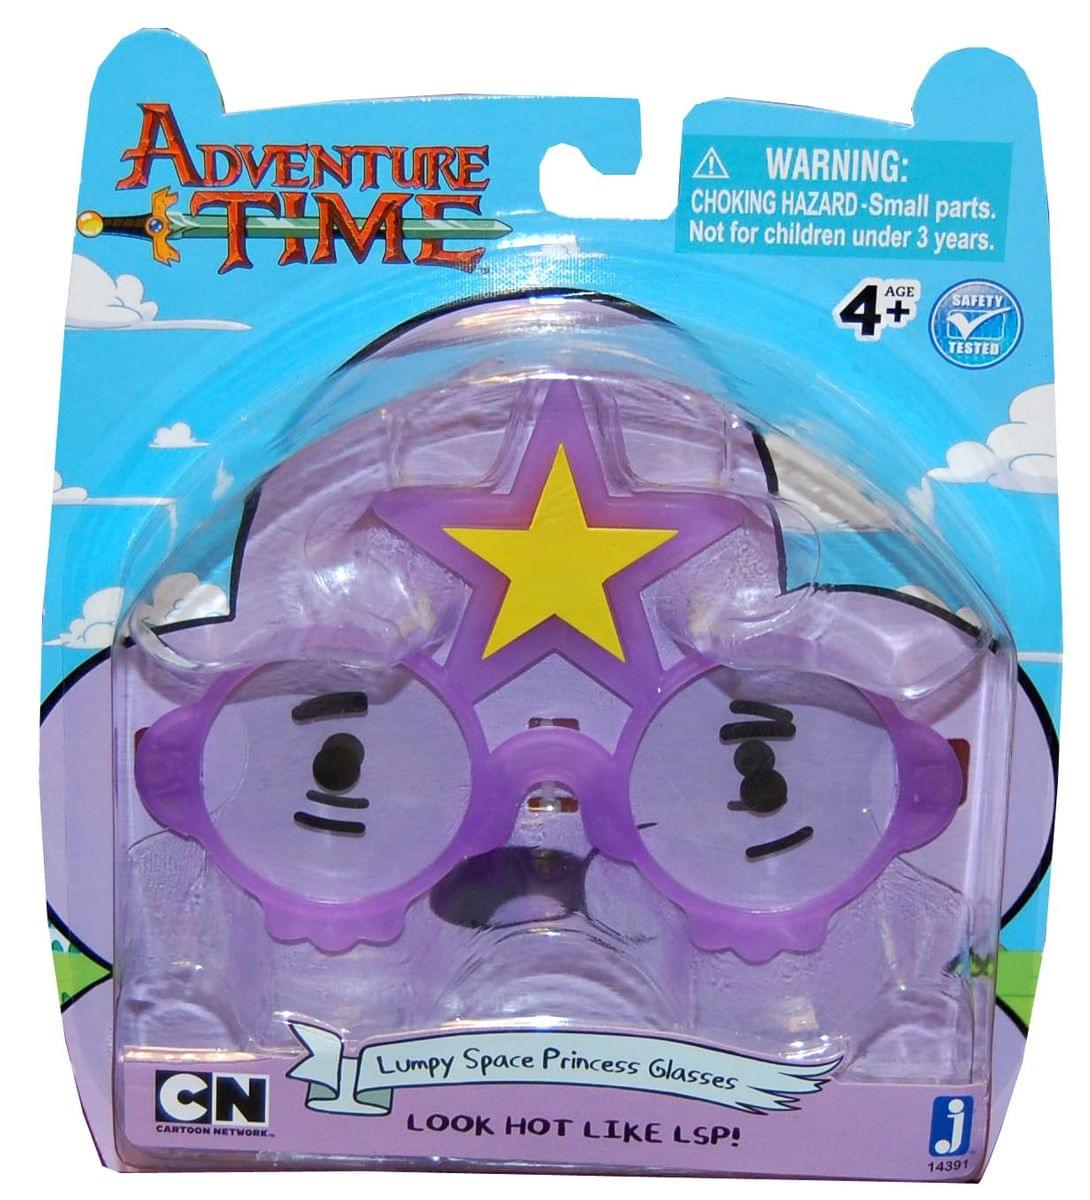 Adventure Time Role Play Costume Glasses Lumpy Space Princess